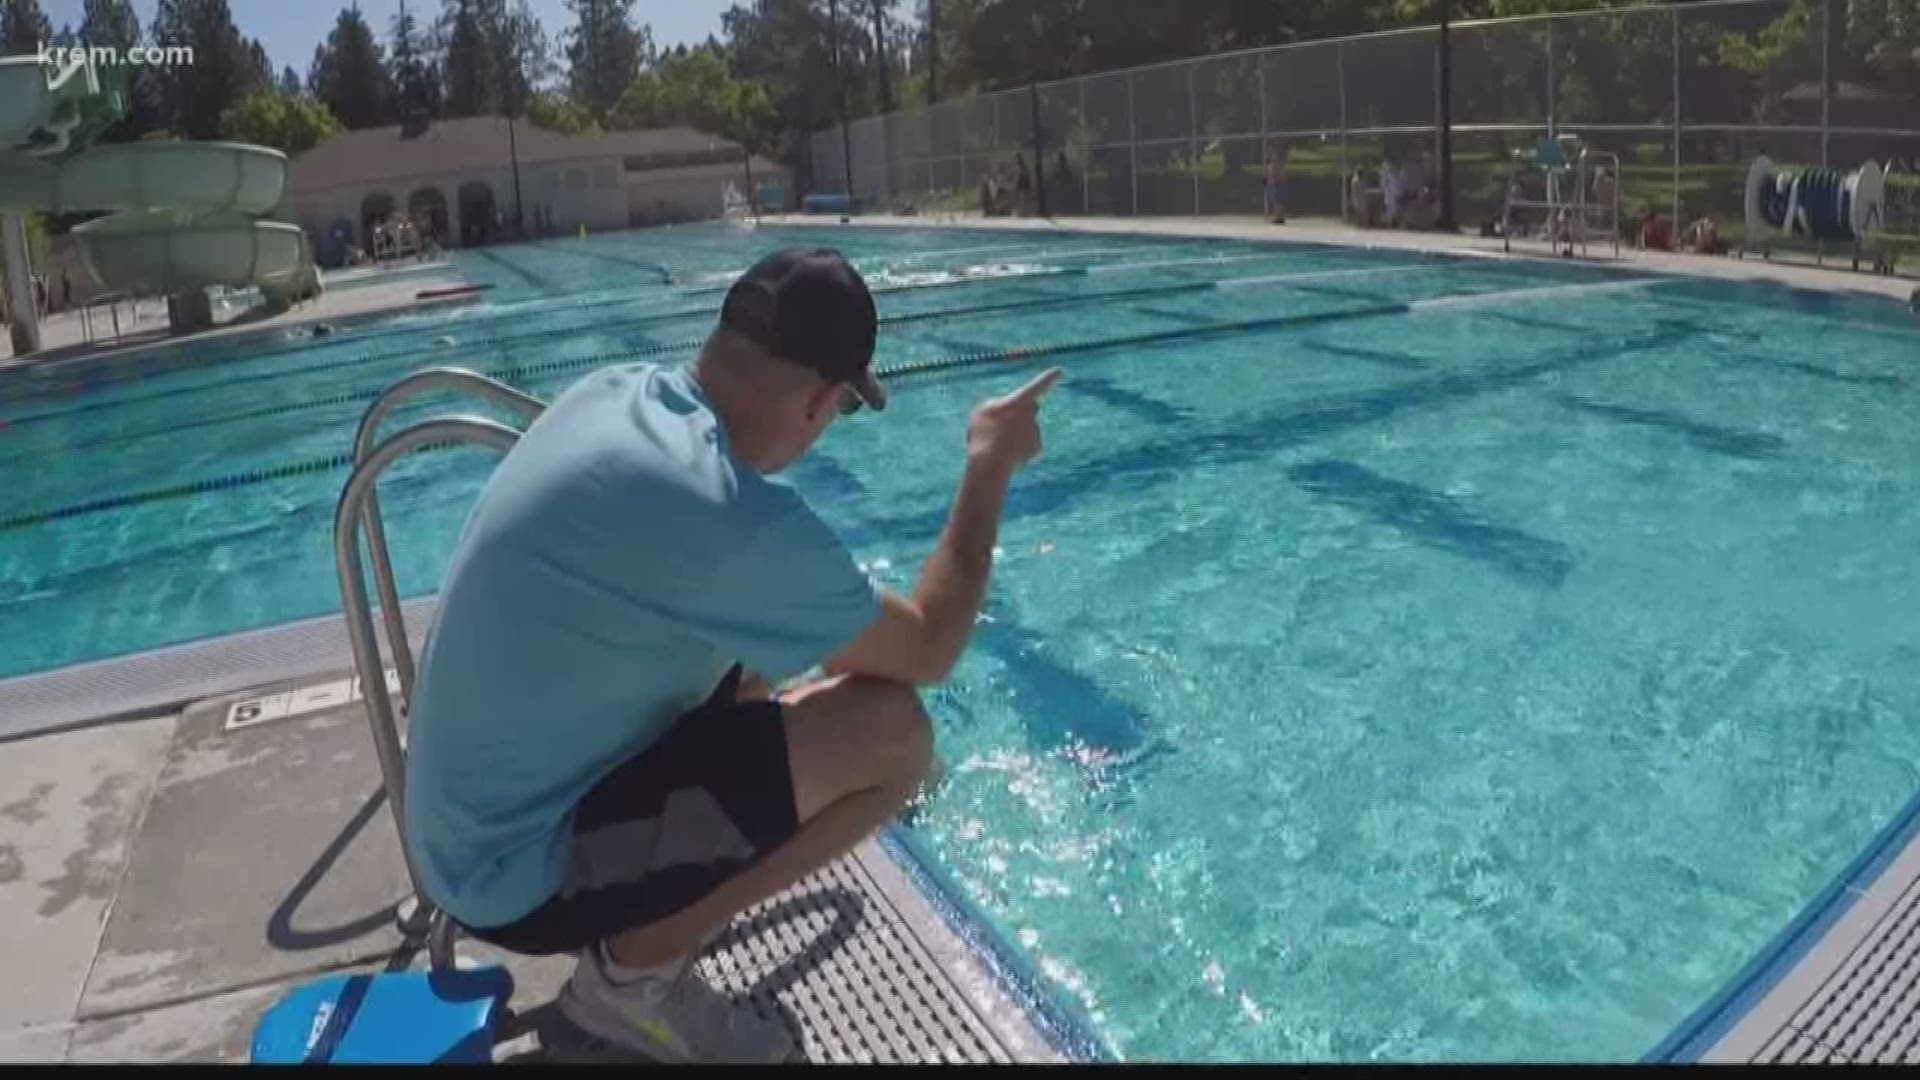 The city tests the water at its pools once every two to three hours to keep it clean. KREM visited two pools to see those test results.